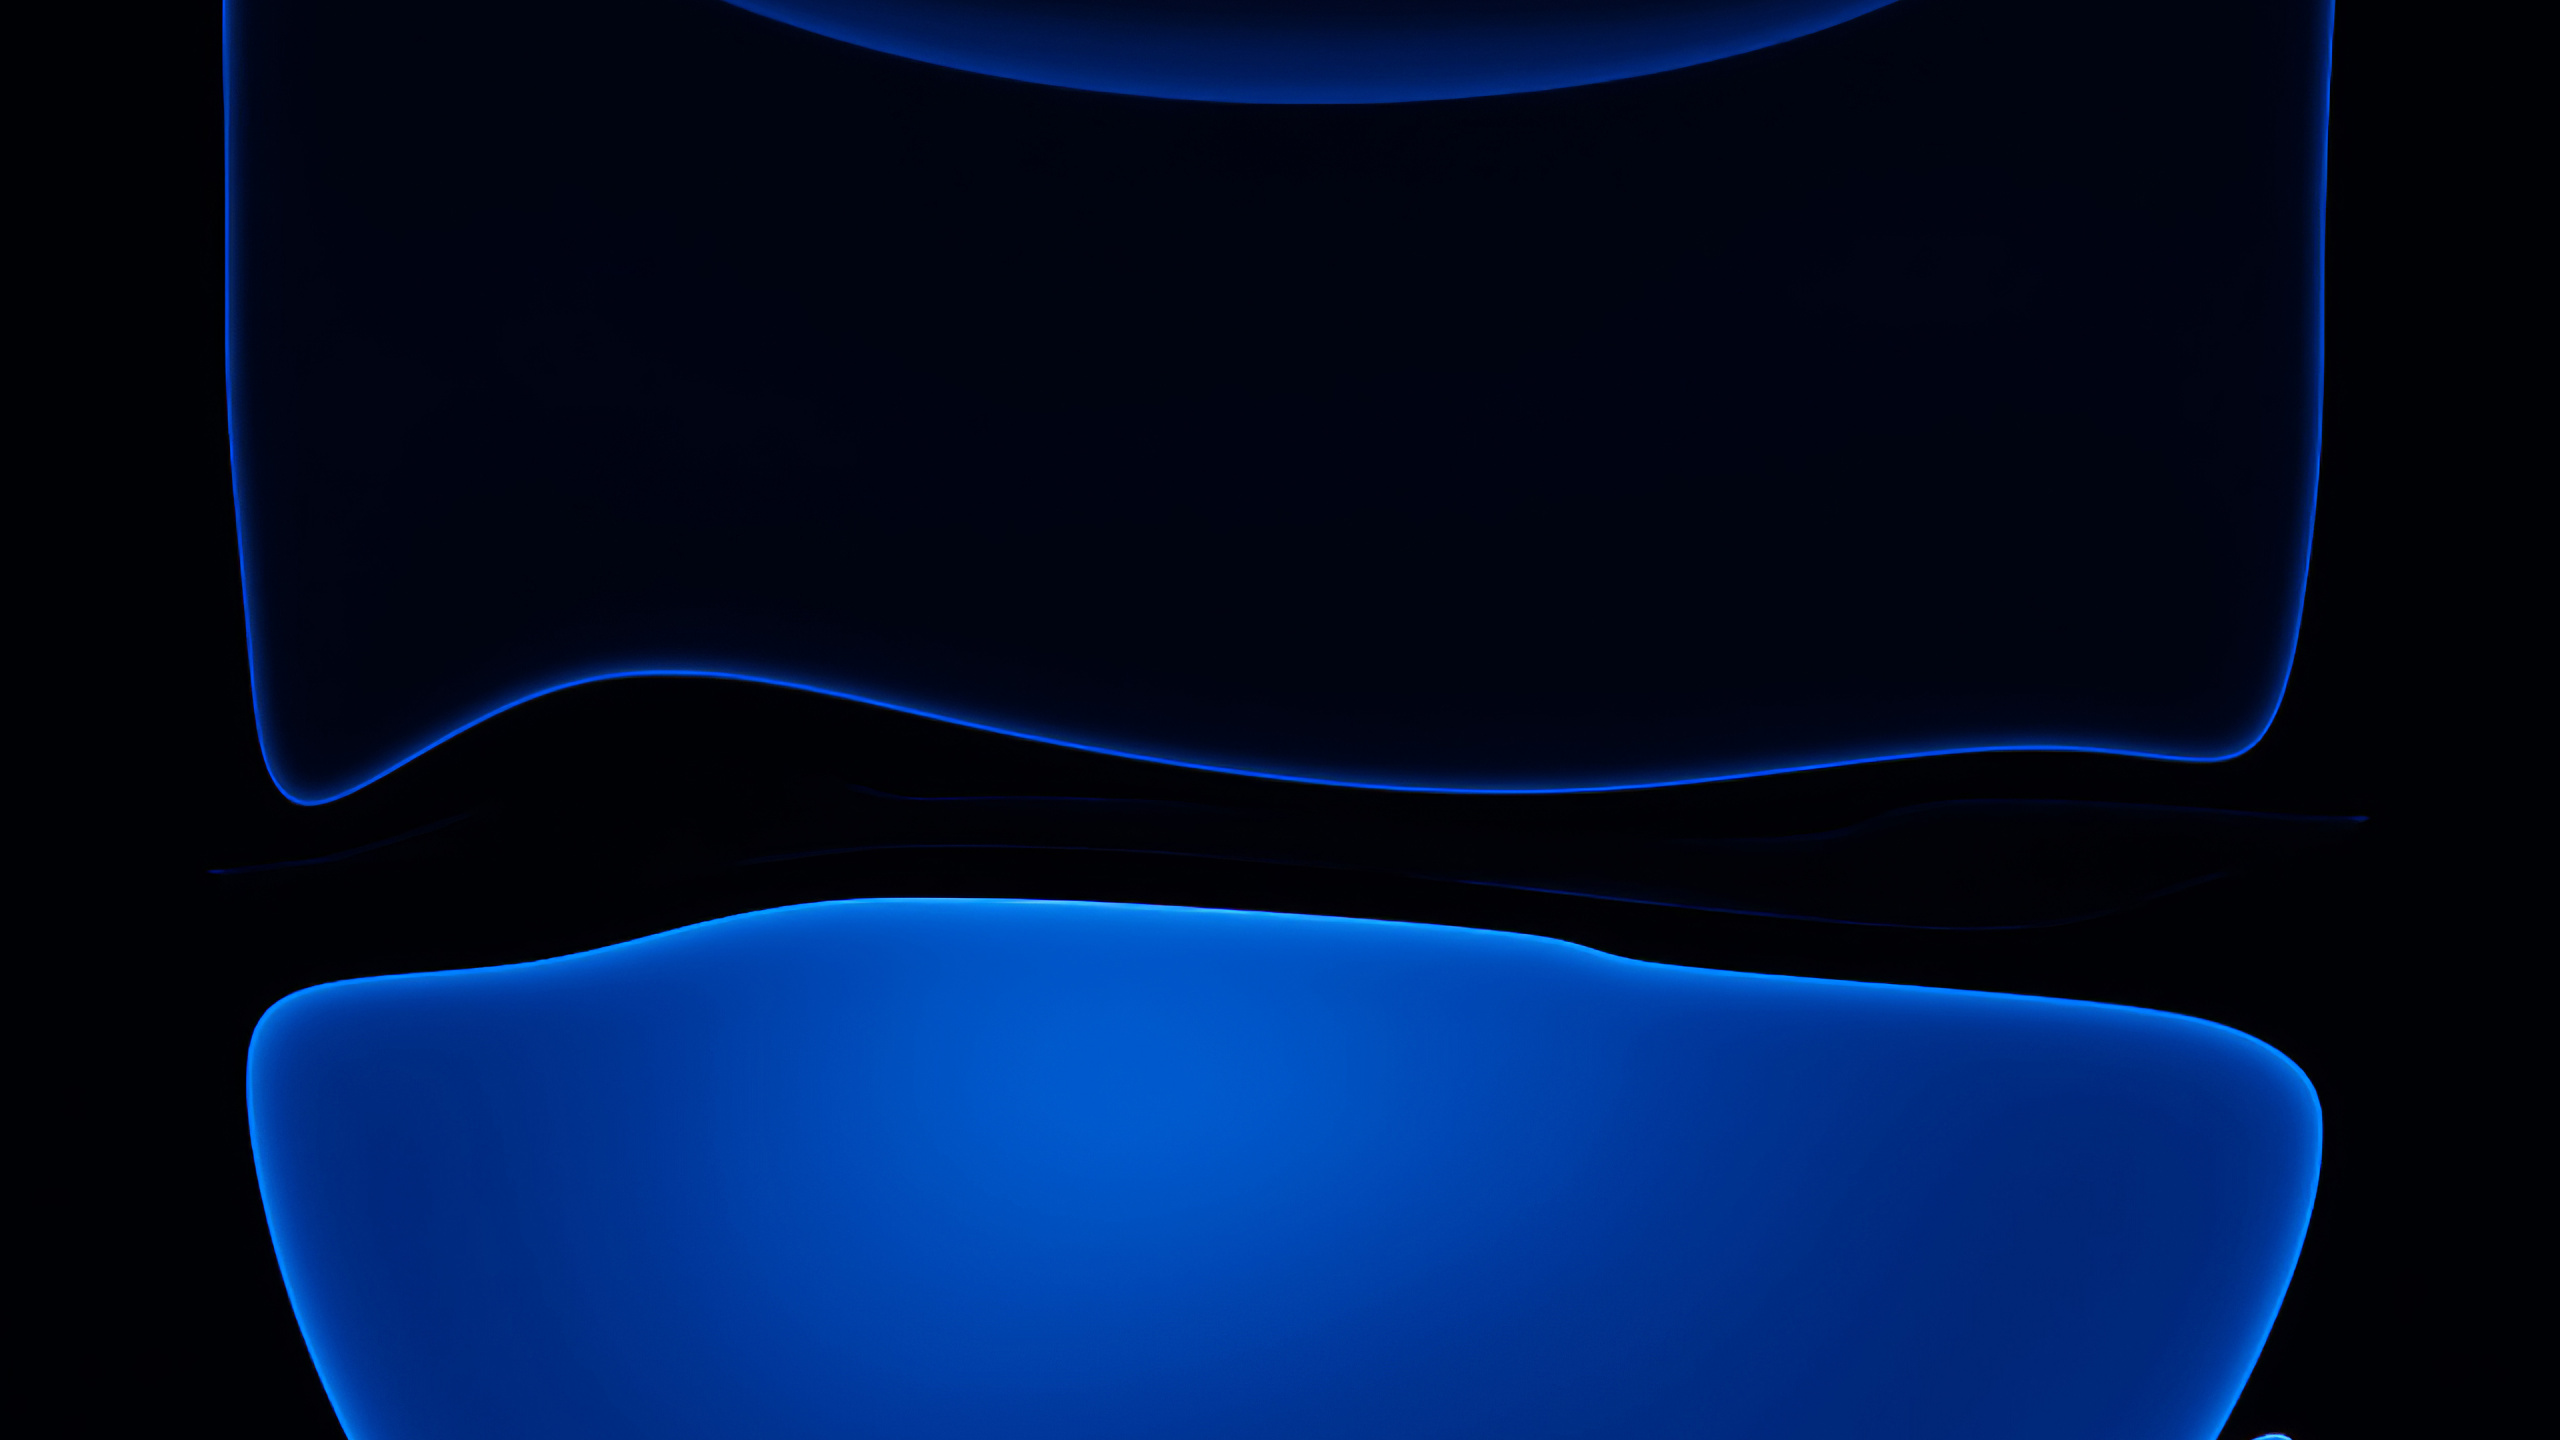 Blue and White Digital Wallpaper. Wallpaper in 2560x1440 Resolution